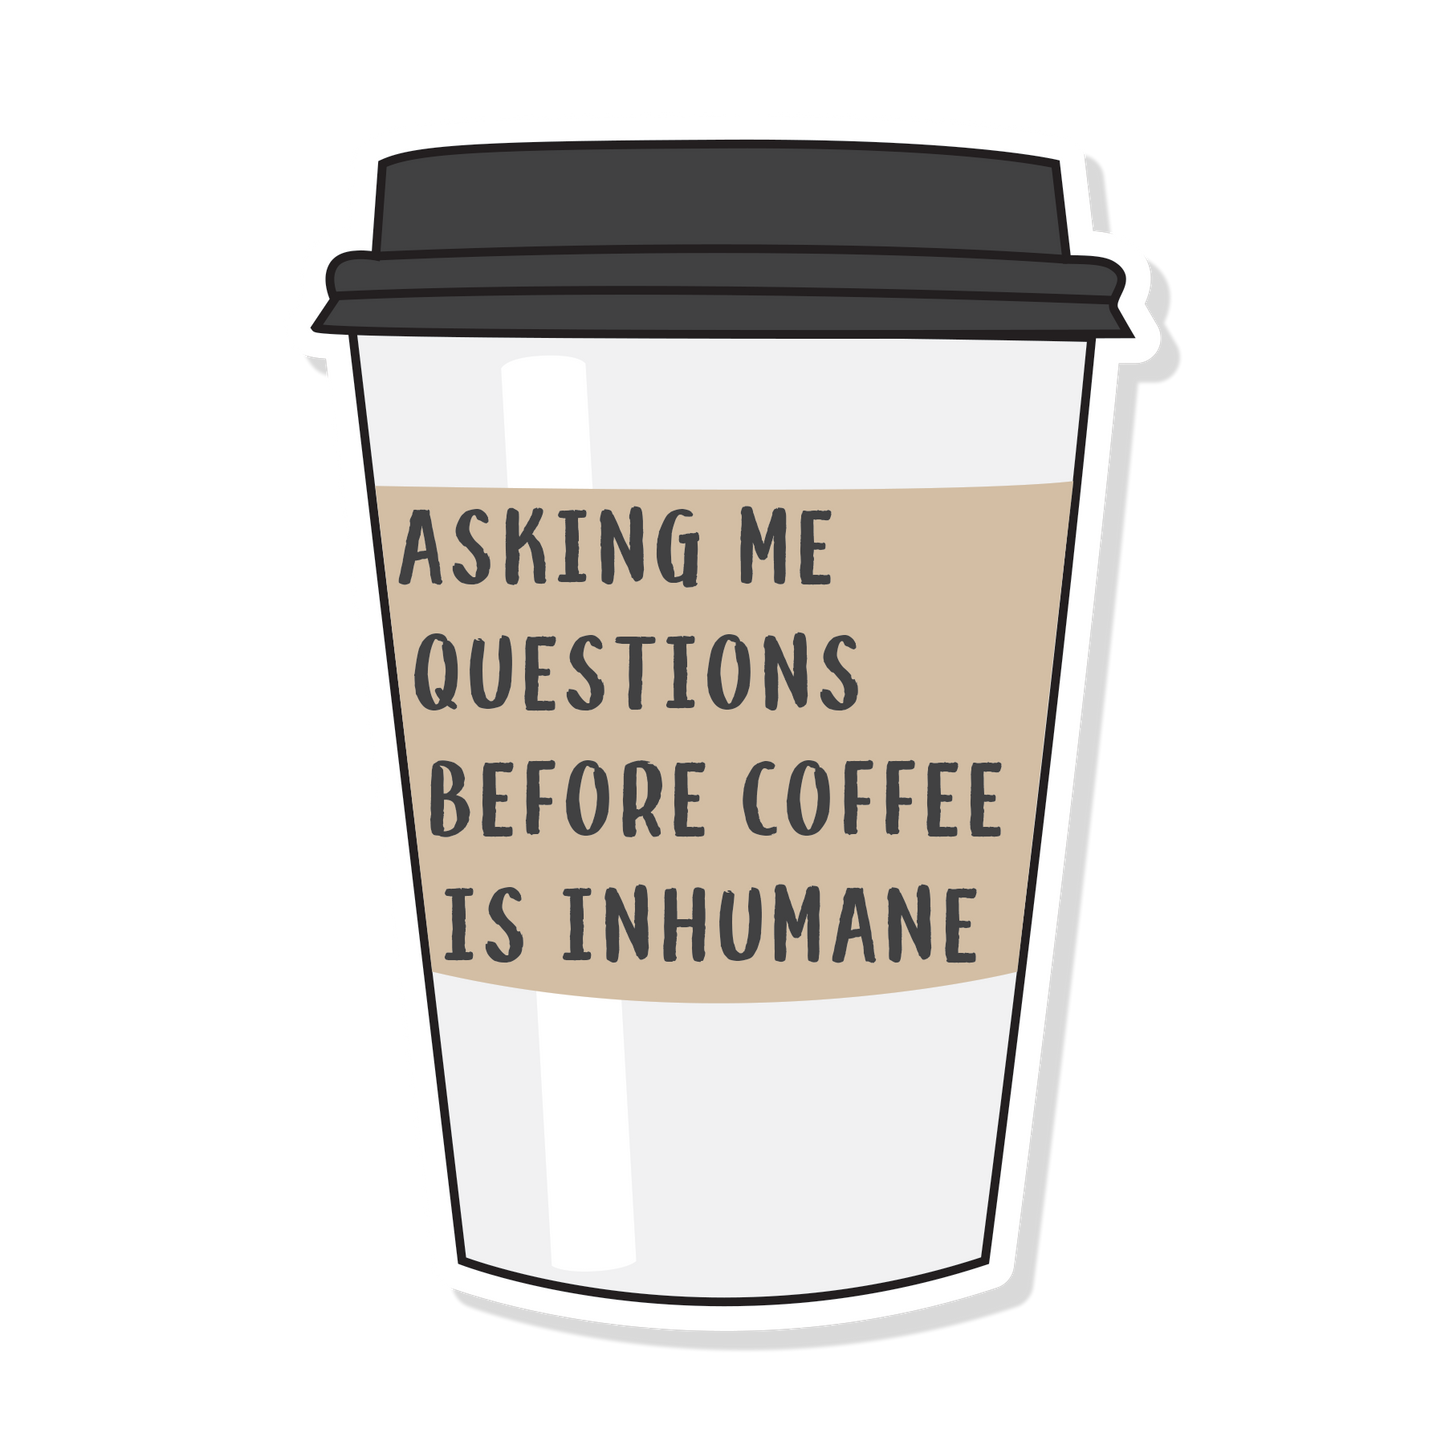 Coffee Cup Sticker | Asking Me Questions Before Coffee Is Inhumane | Mental Health Stickers